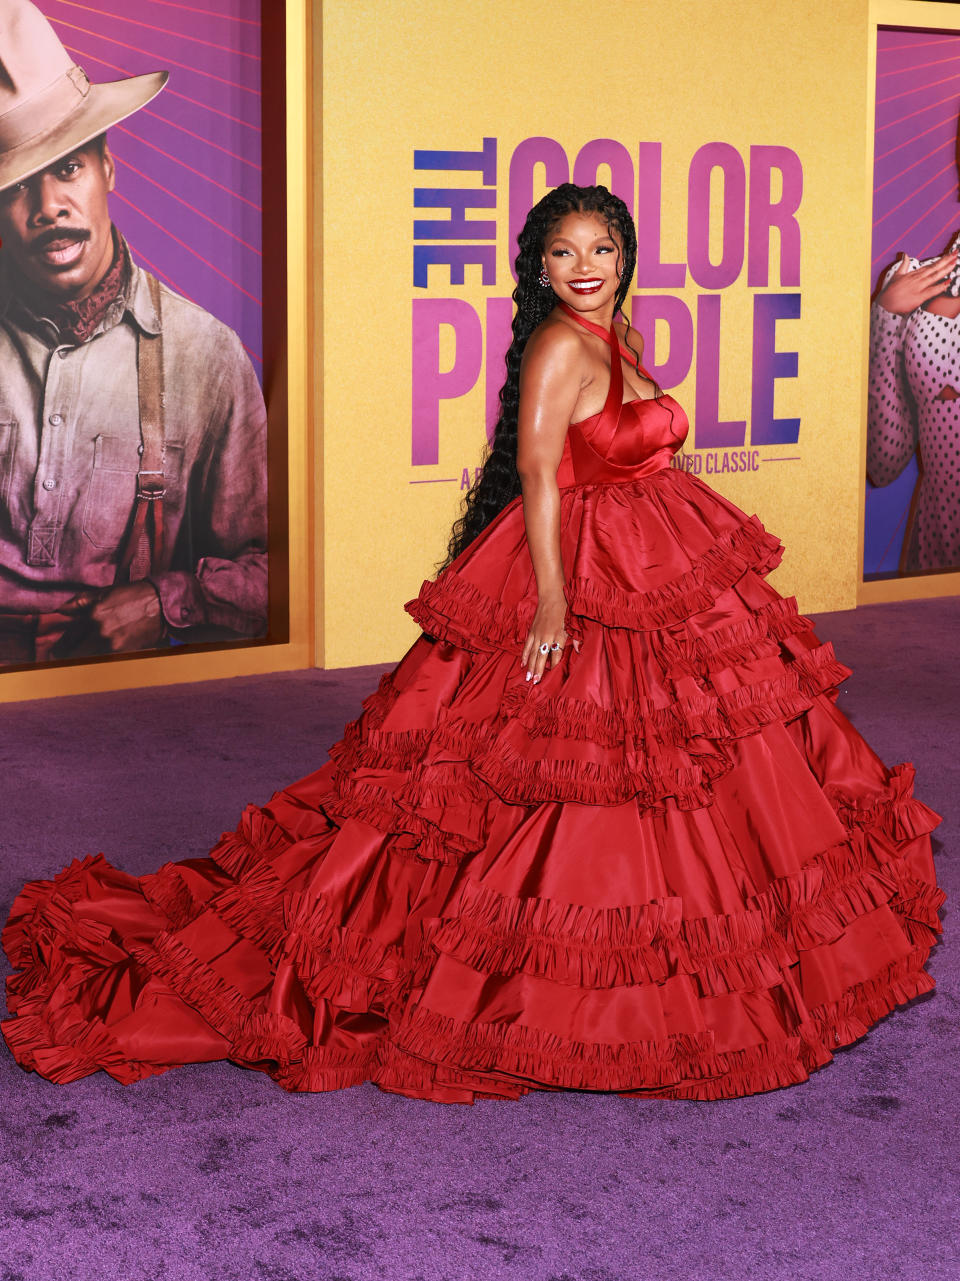 LOS ANGELES, CALIFORNIA - DECEMBER 06: Halle Bailey attends the World Premiere of Warner Bros.' "The Color Purple" at Academy Museum of Motion Pictures on December 06, 2023 in Los Angeles, California. (Photo by Kayla Oaddams/WireImage)